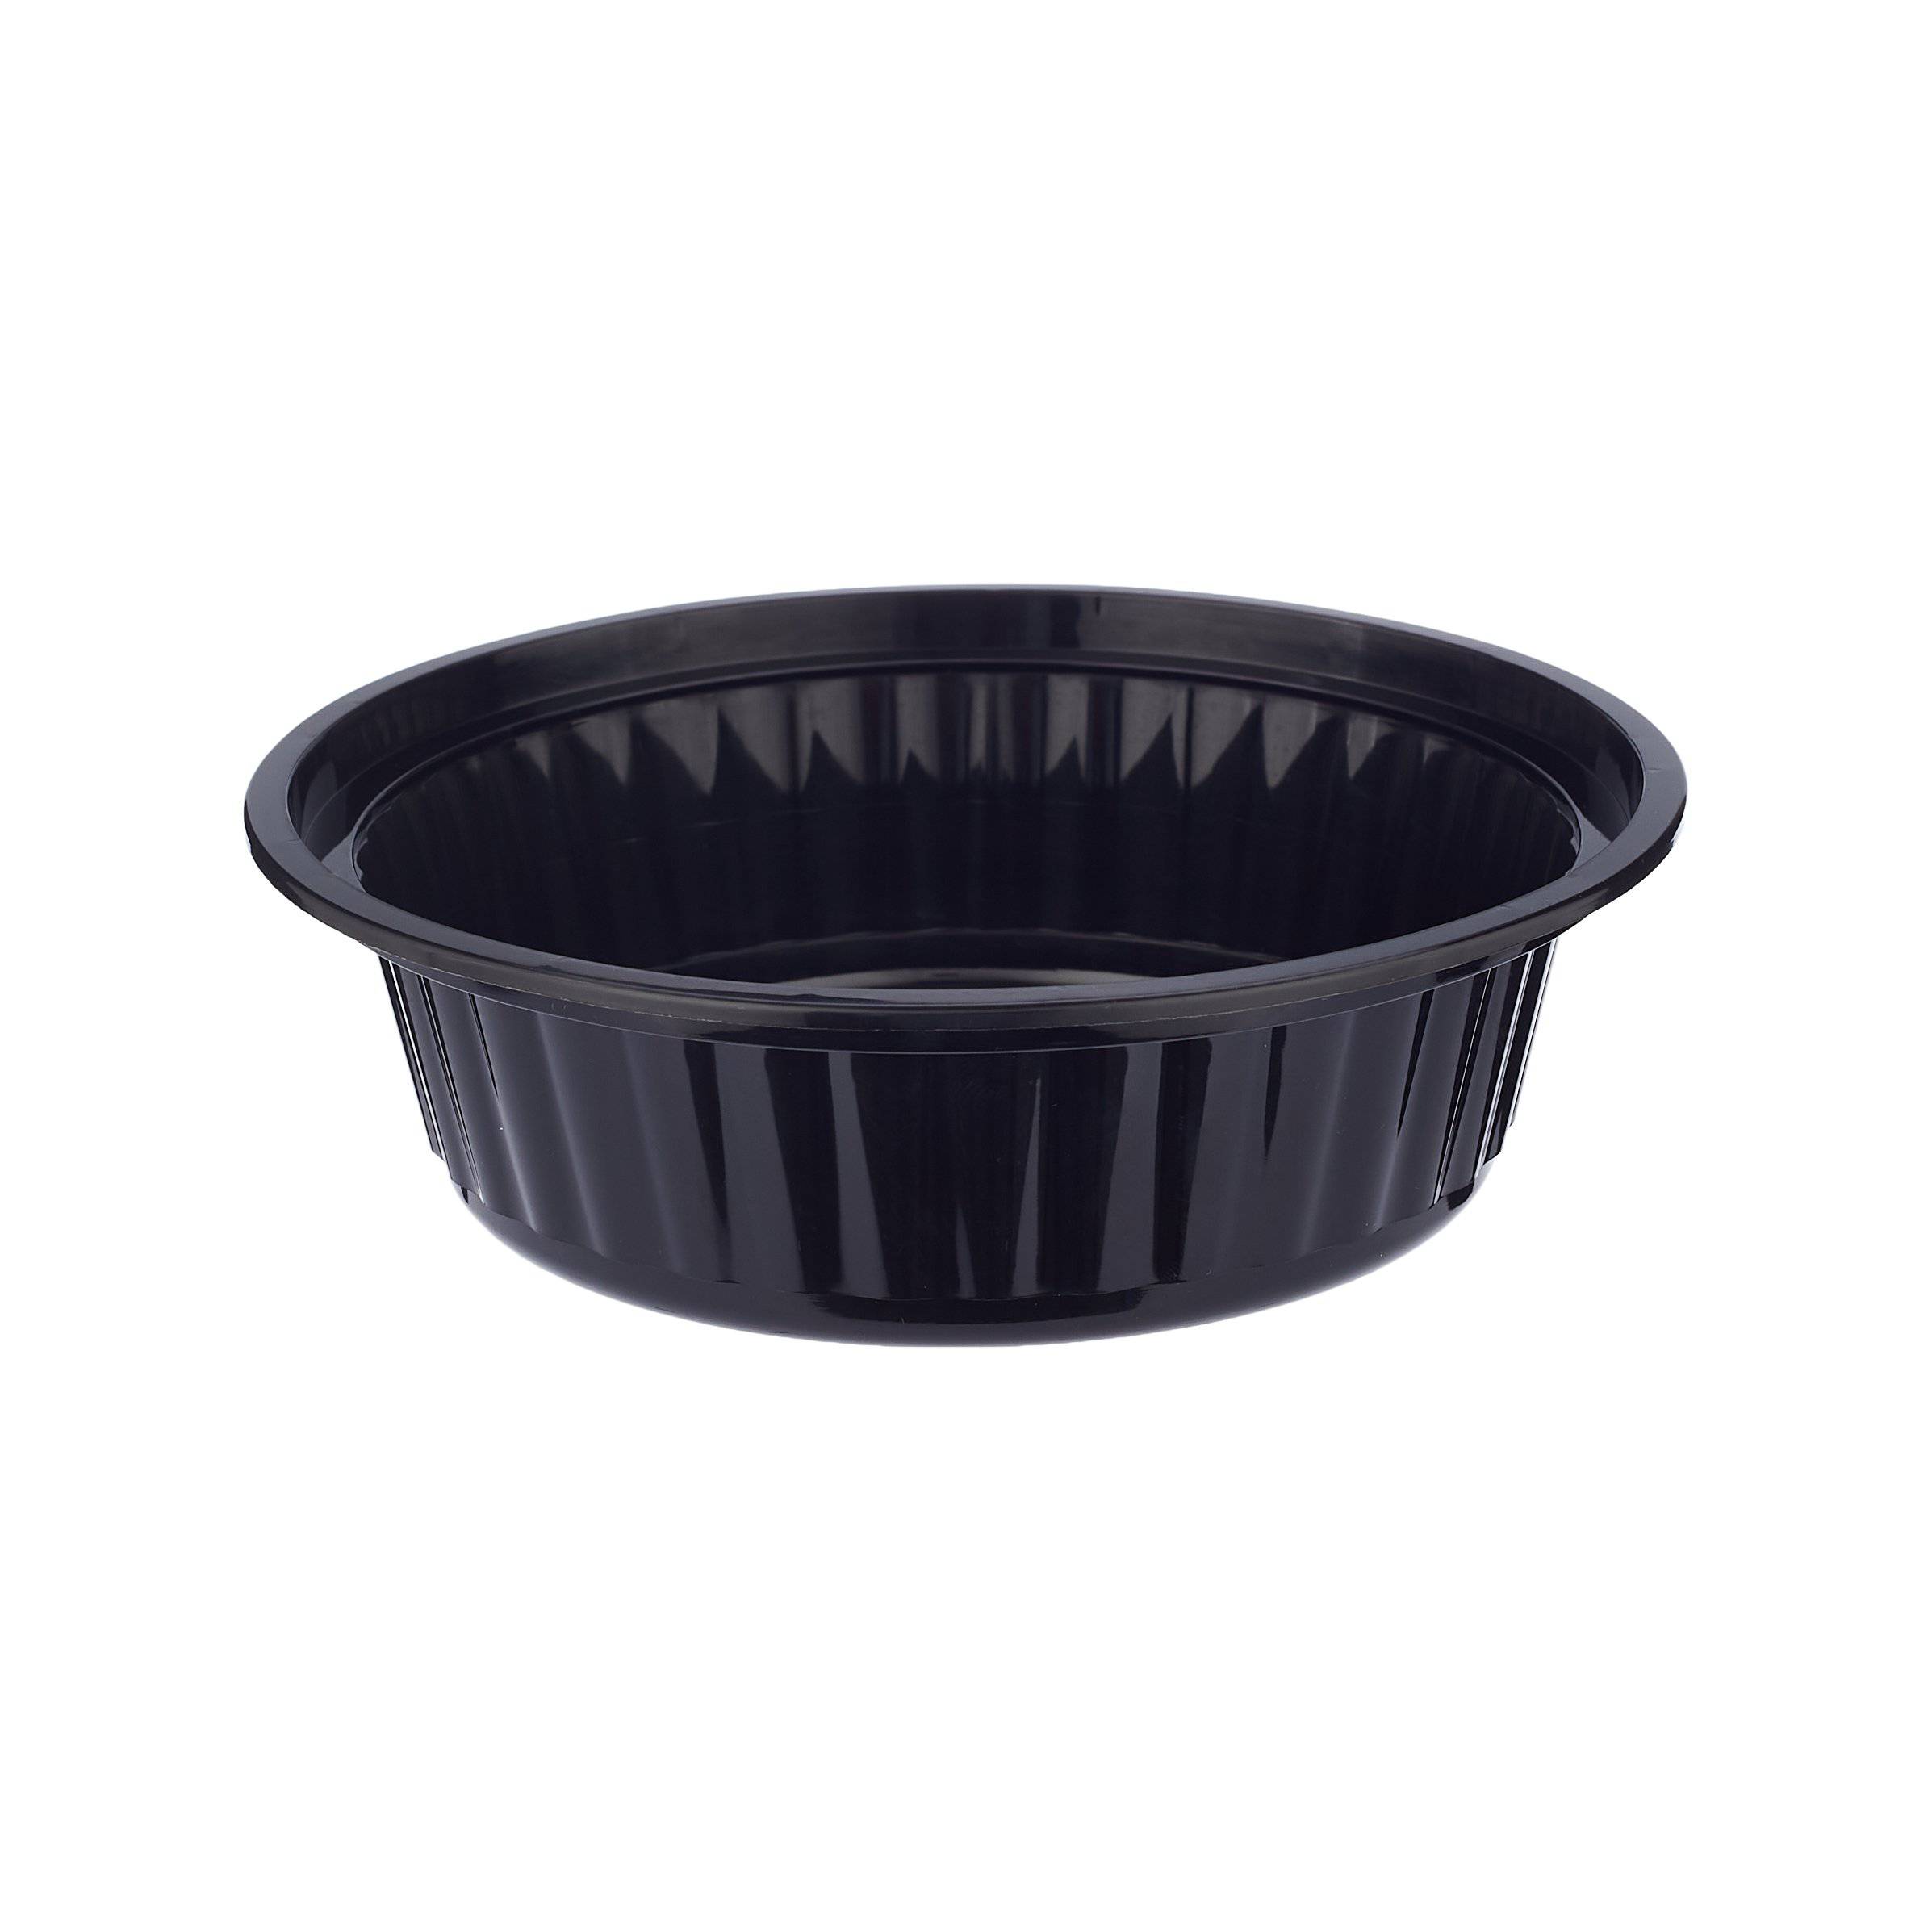 Black Base Round Container 16 oz with Lids 150 Pieces - Hotpack Global